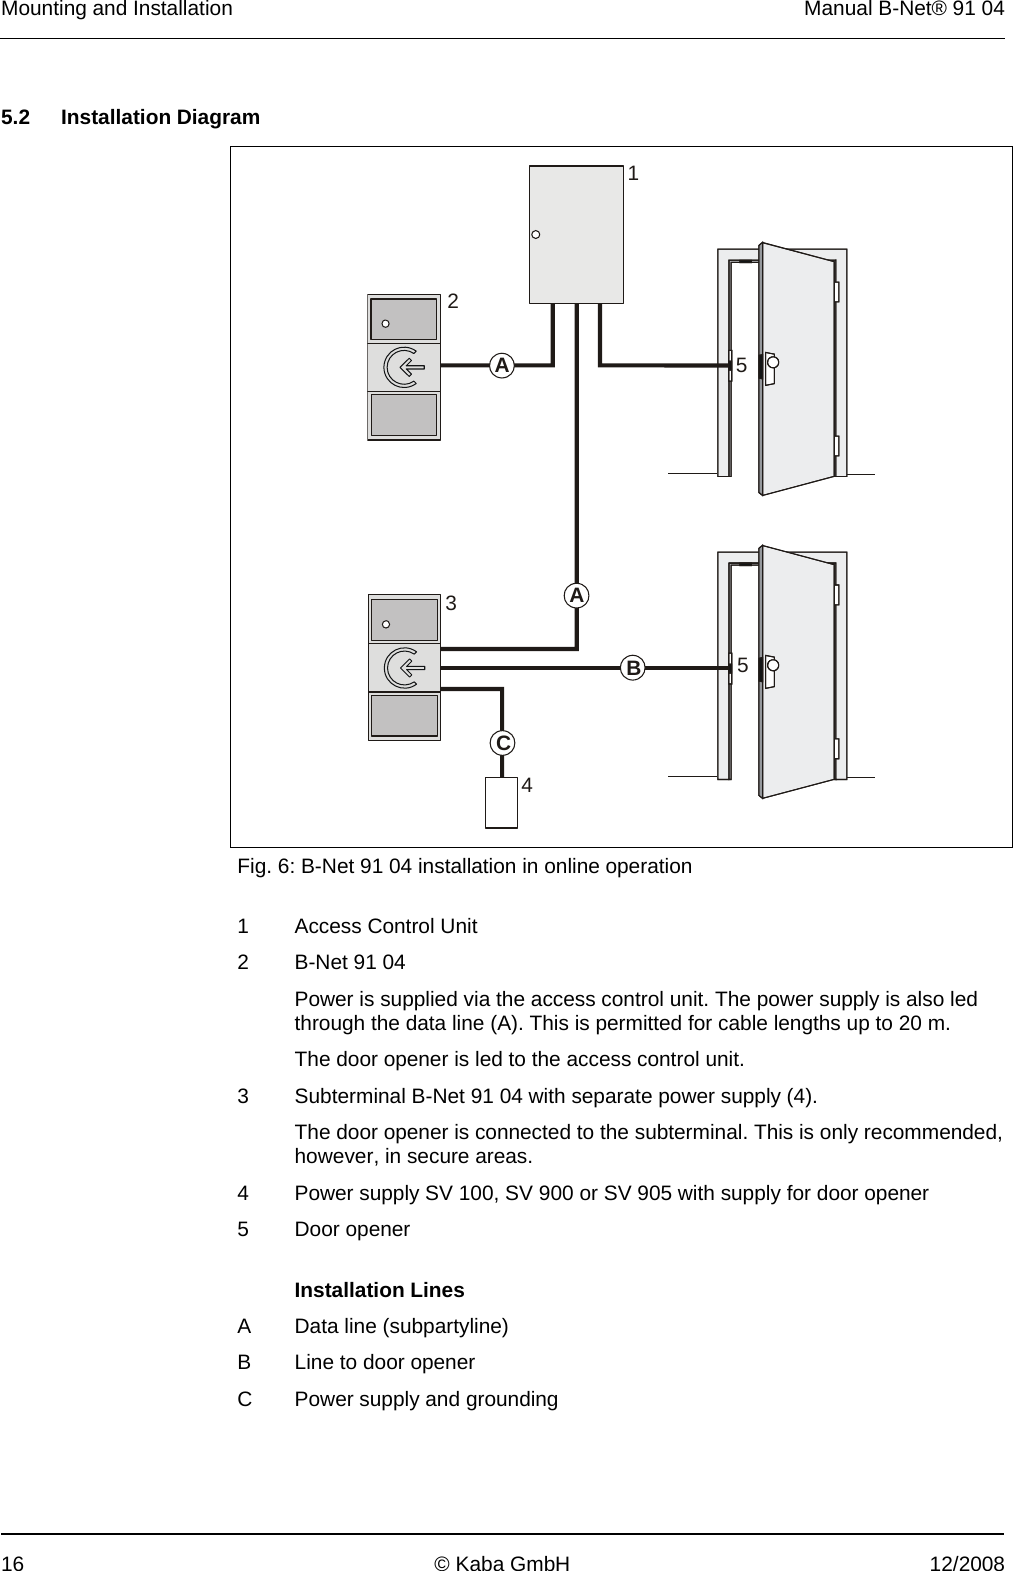 Mounting and Installation  Manual B-Net® 91 04 16  © Kaba GmbH  12/2008   5.2 Installation Diagram    AABC124355 Fig. 6: B-Net 91 04 installation in online operation  1  Access Control Unit 2  B-Net 91 04  Power is supplied via the access control unit. The power supply is also led through the data line (A). This is permitted for cable lengths up to 20 m. The door opener is led to the access control unit. 3  Subterminal B-Net 91 04 with separate power supply (4). The door opener is connected to the subterminal. This is only recommended, however, in secure areas. 4  Power supply SV 100, SV 900 or SV 905 with supply for door opener 5 Door opener    Installation Lines A  Data line (subpartyline) B  Line to door opener C  Power supply and grounding  